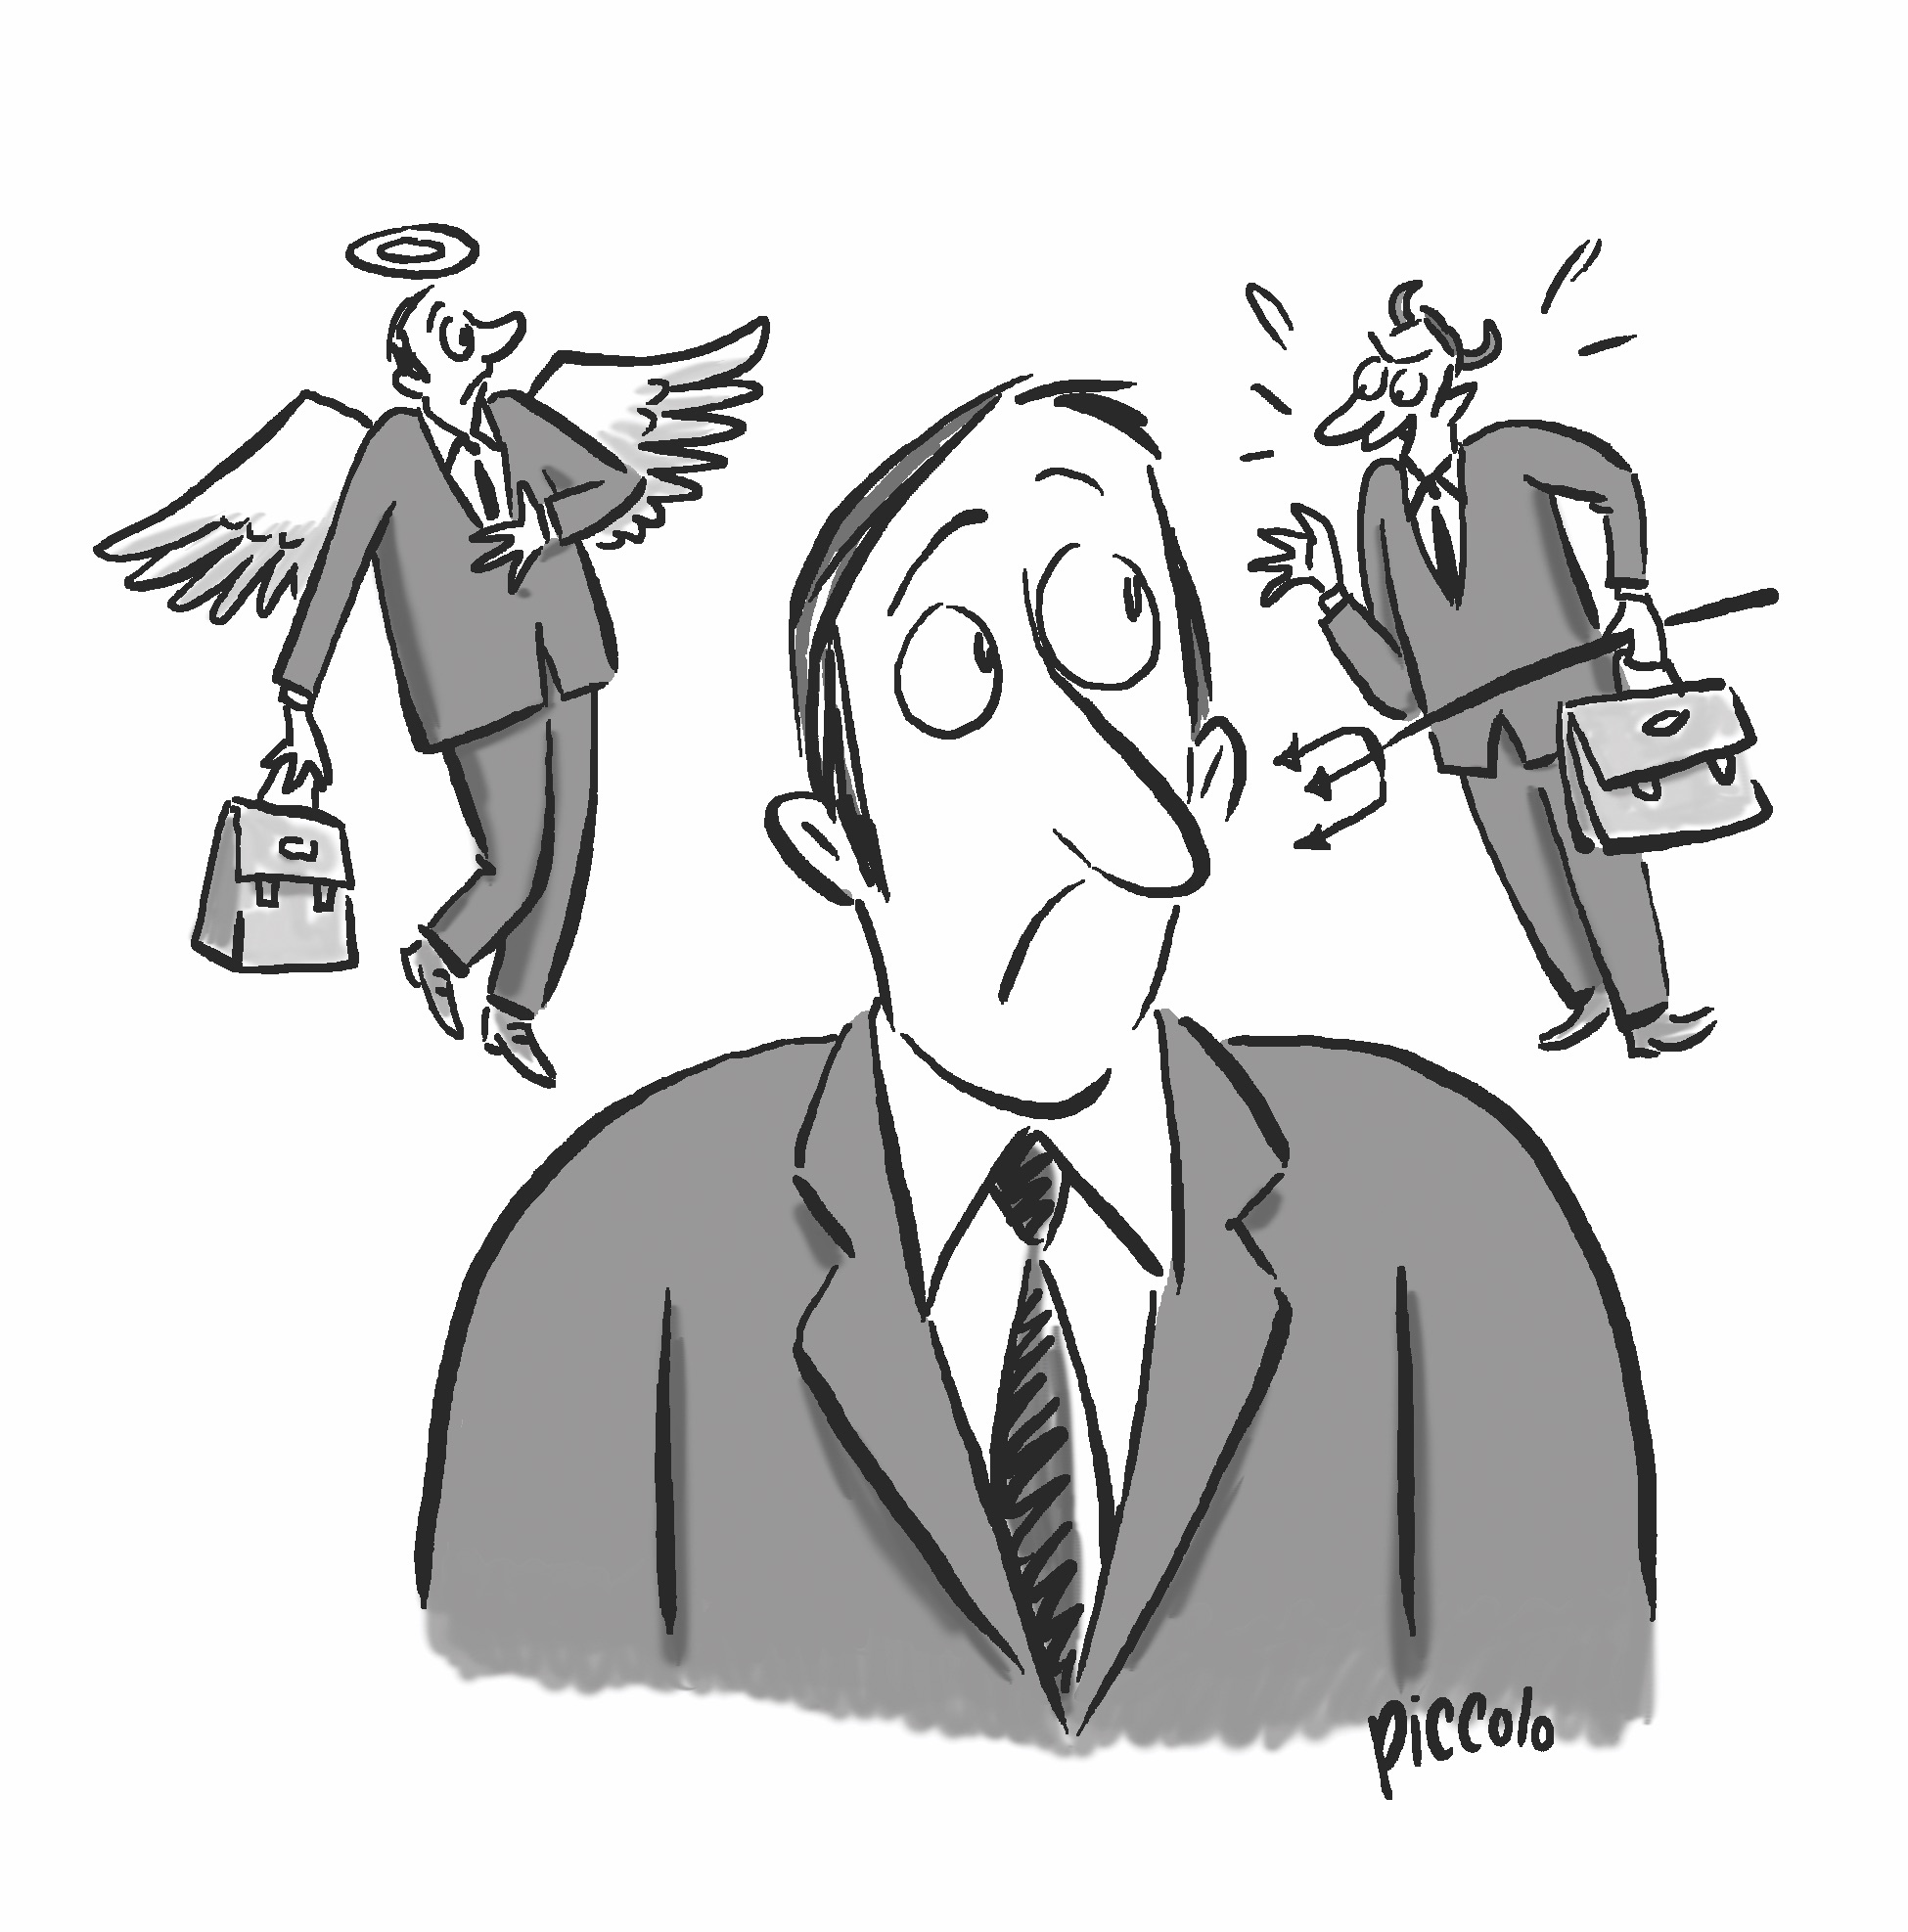 Cartoon Caption: Good vs. evil—what choice will this lawyer make?